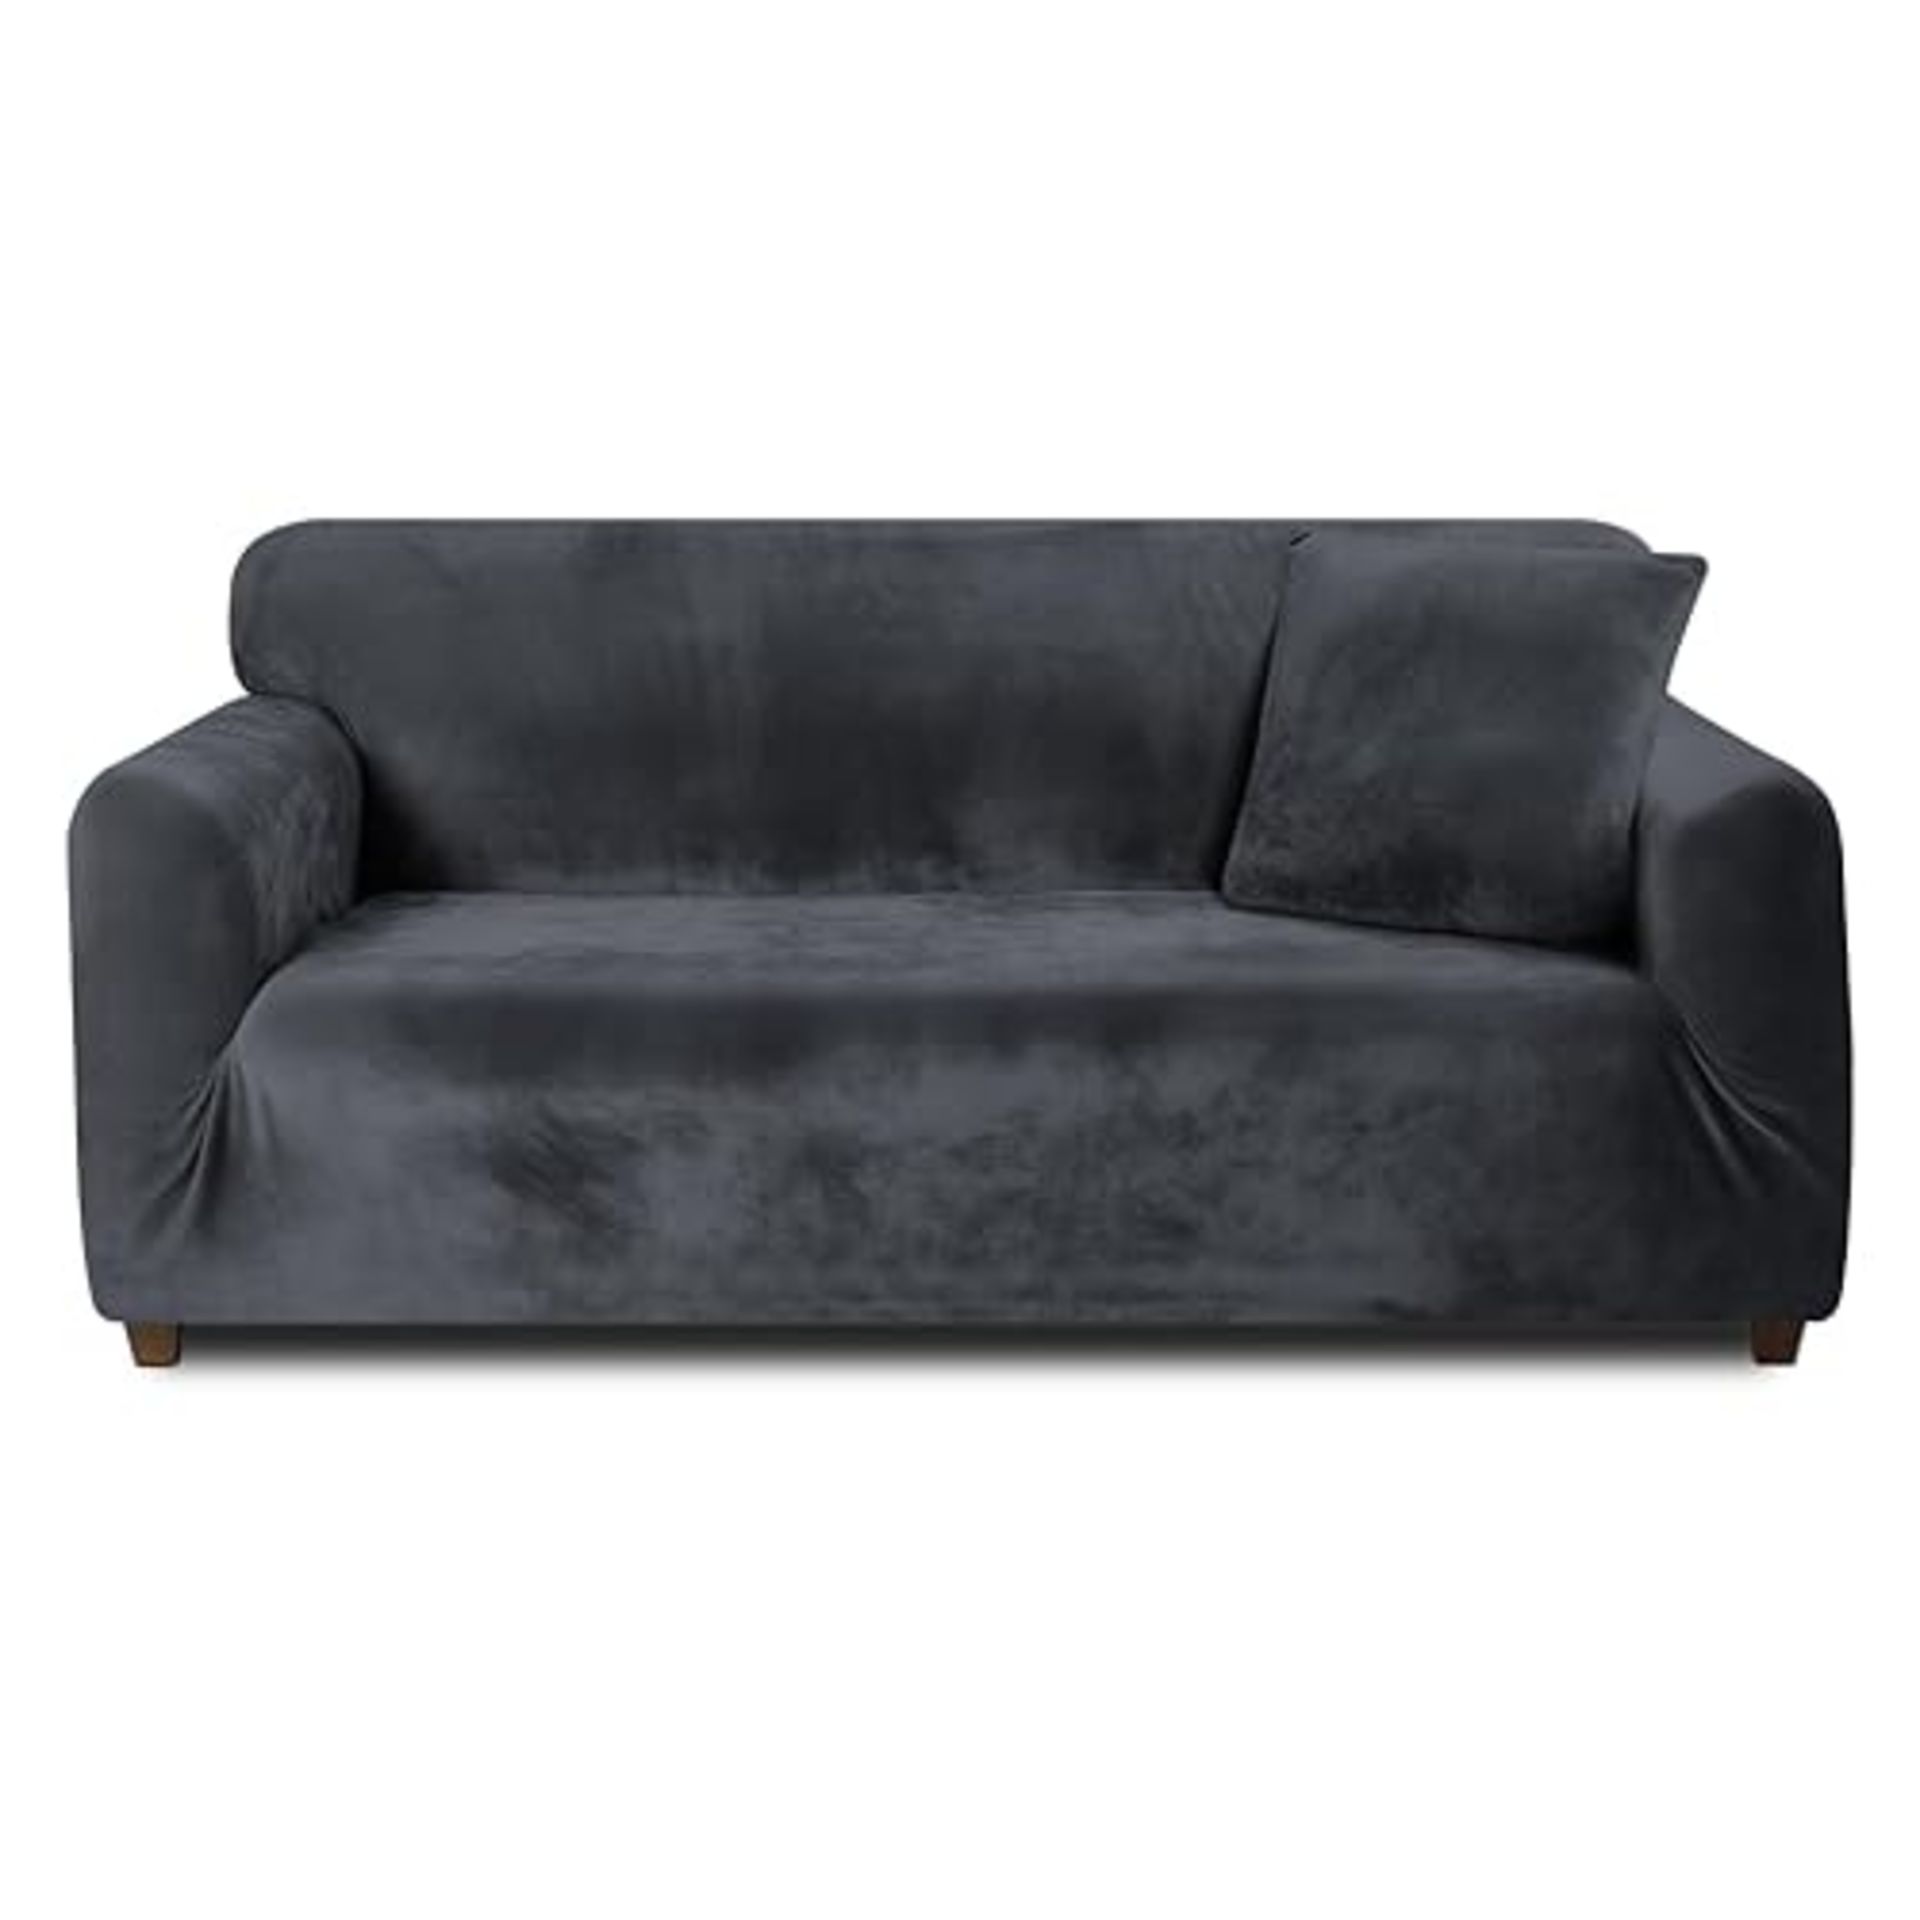 Teynewer Thick Velvet Sofa Covers 1 2 3 4 Seater High Stretch Non-Slip Couch Cover Furniture Protec